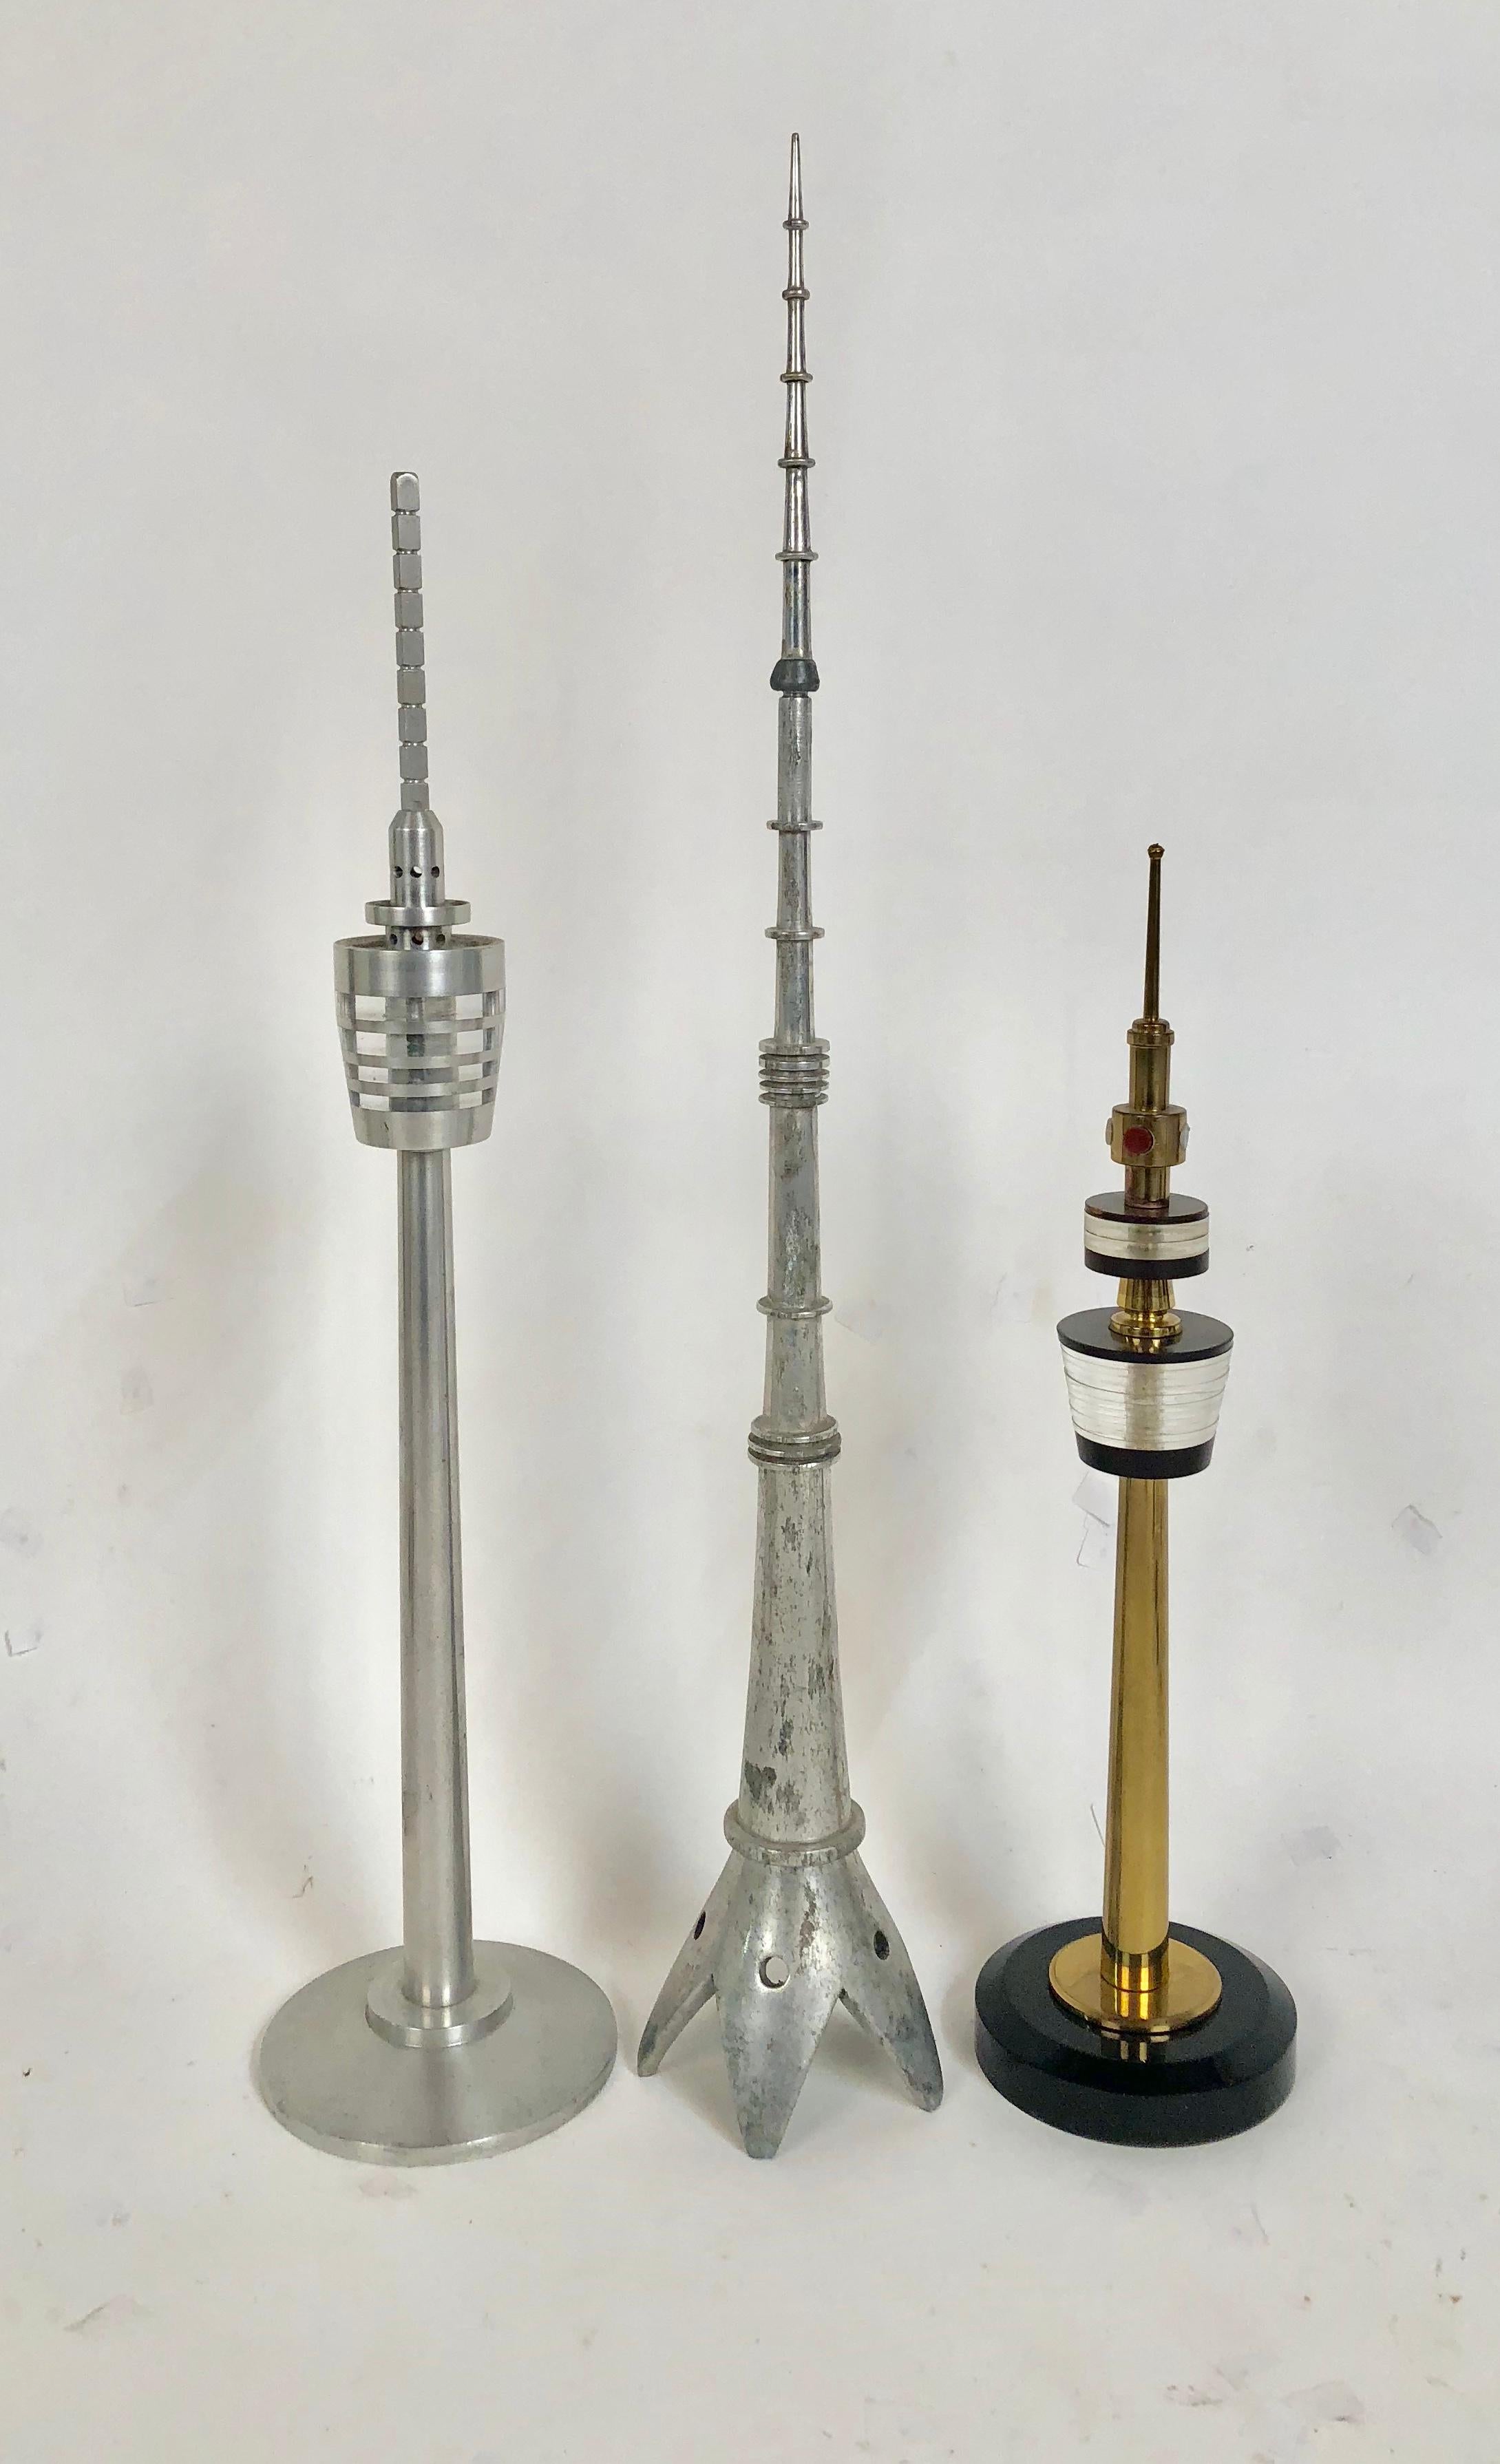 Collection Vintage Space Age Looking TV Tower Models circa 1950-1970 from Europe 4